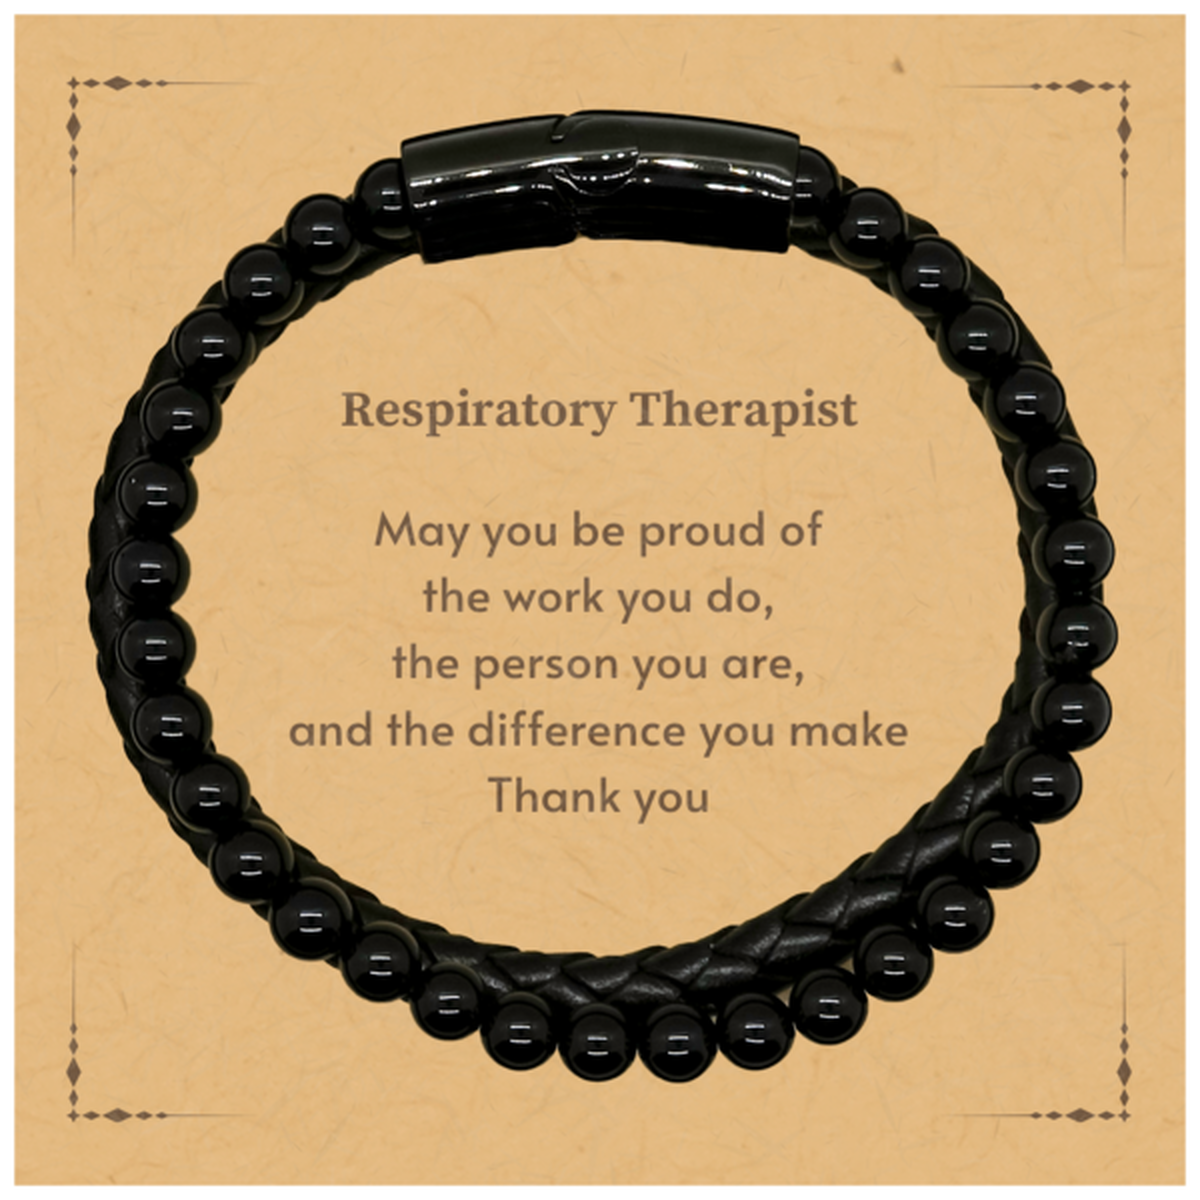 Heartwarming Stone Leather Bracelets Retirement Coworkers Gifts for Respiratory Therapist, Respiratory Therapist May You be proud of the work you do, the person you are Gifts for Boss Men Women Friends